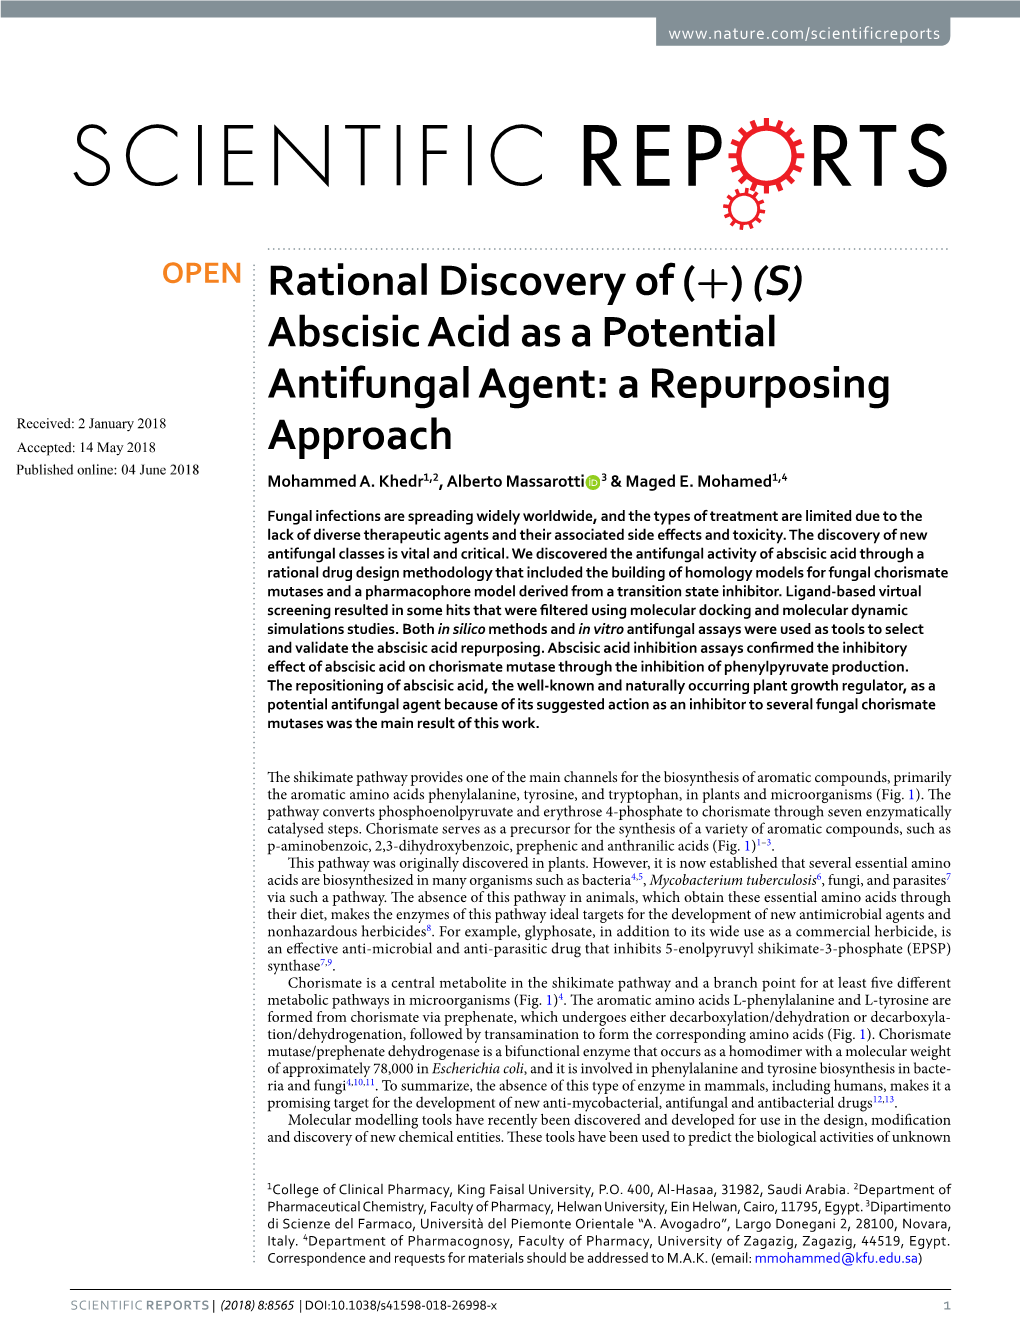 Abscisic Acid As a Potential Antifungal Agent: a Repurposing Received: 2 January 2018 Accepted: 14 May 2018 Approach Published: Xx Xx Xxxx Mohammed A